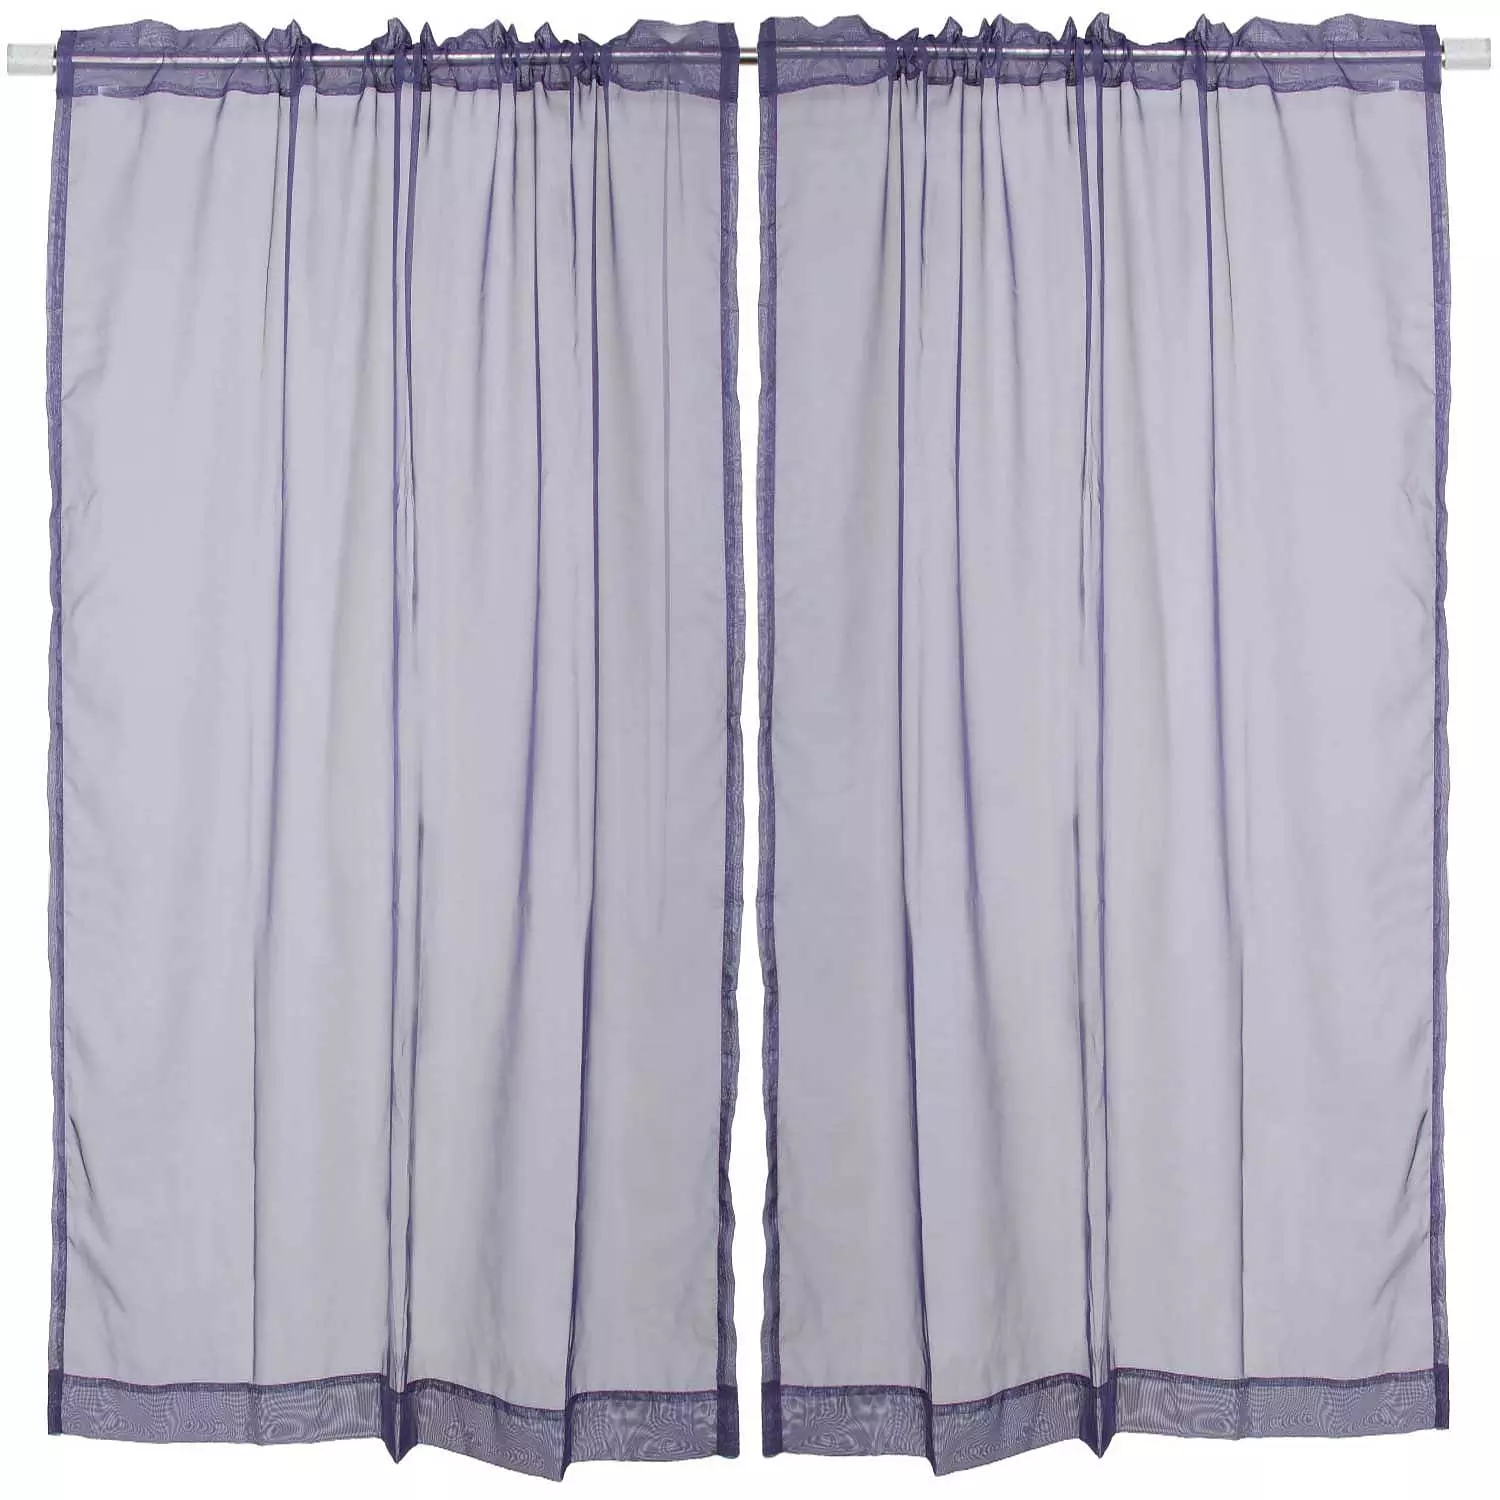 Two semi-sheer voile panels with rod pocket, 54"x84", navy